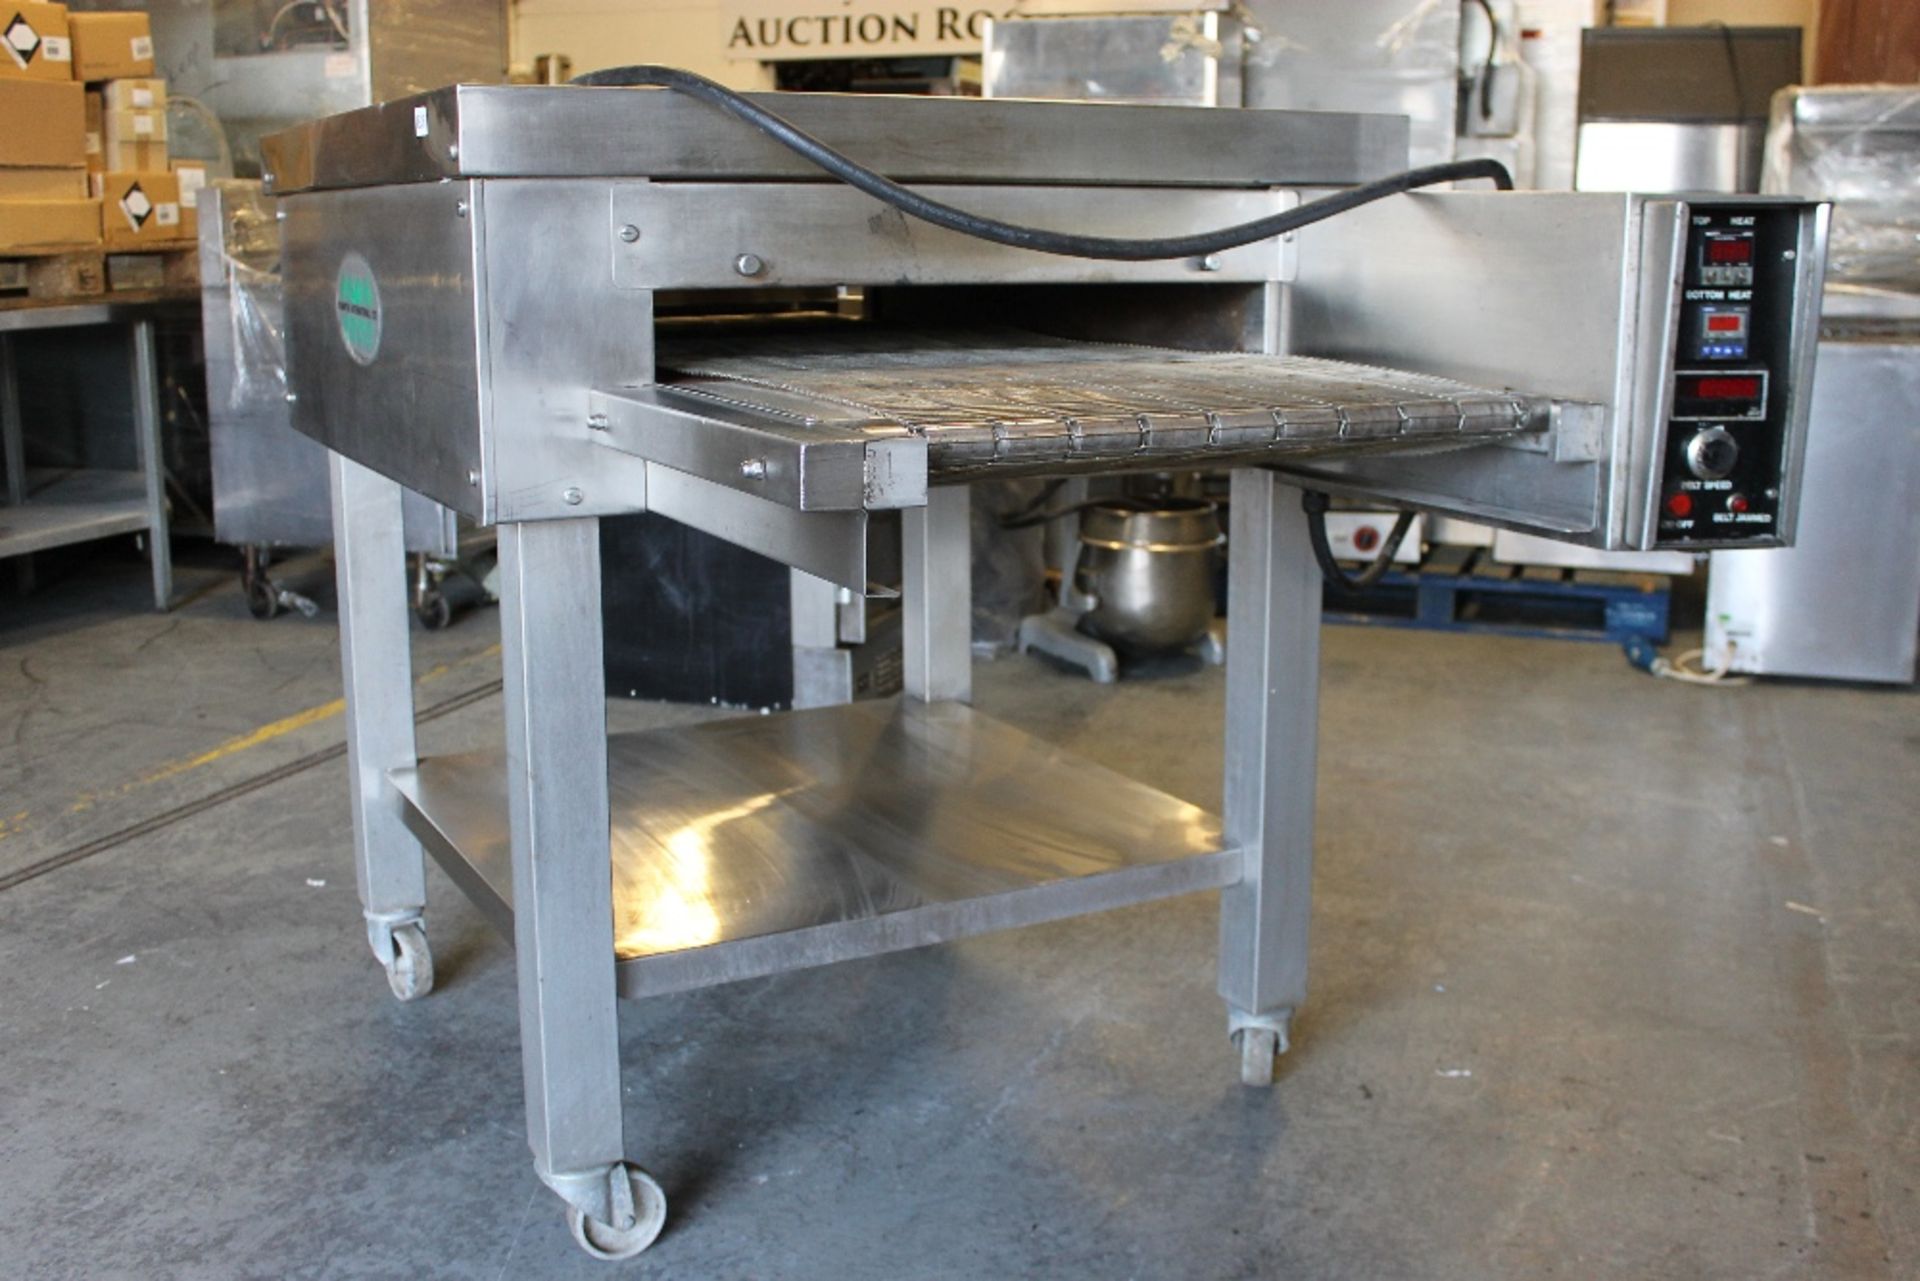 Frampton Large Pizza Conveyor Oven – on mobile standW210cm x H118cm x D106cm - Image 3 of 4